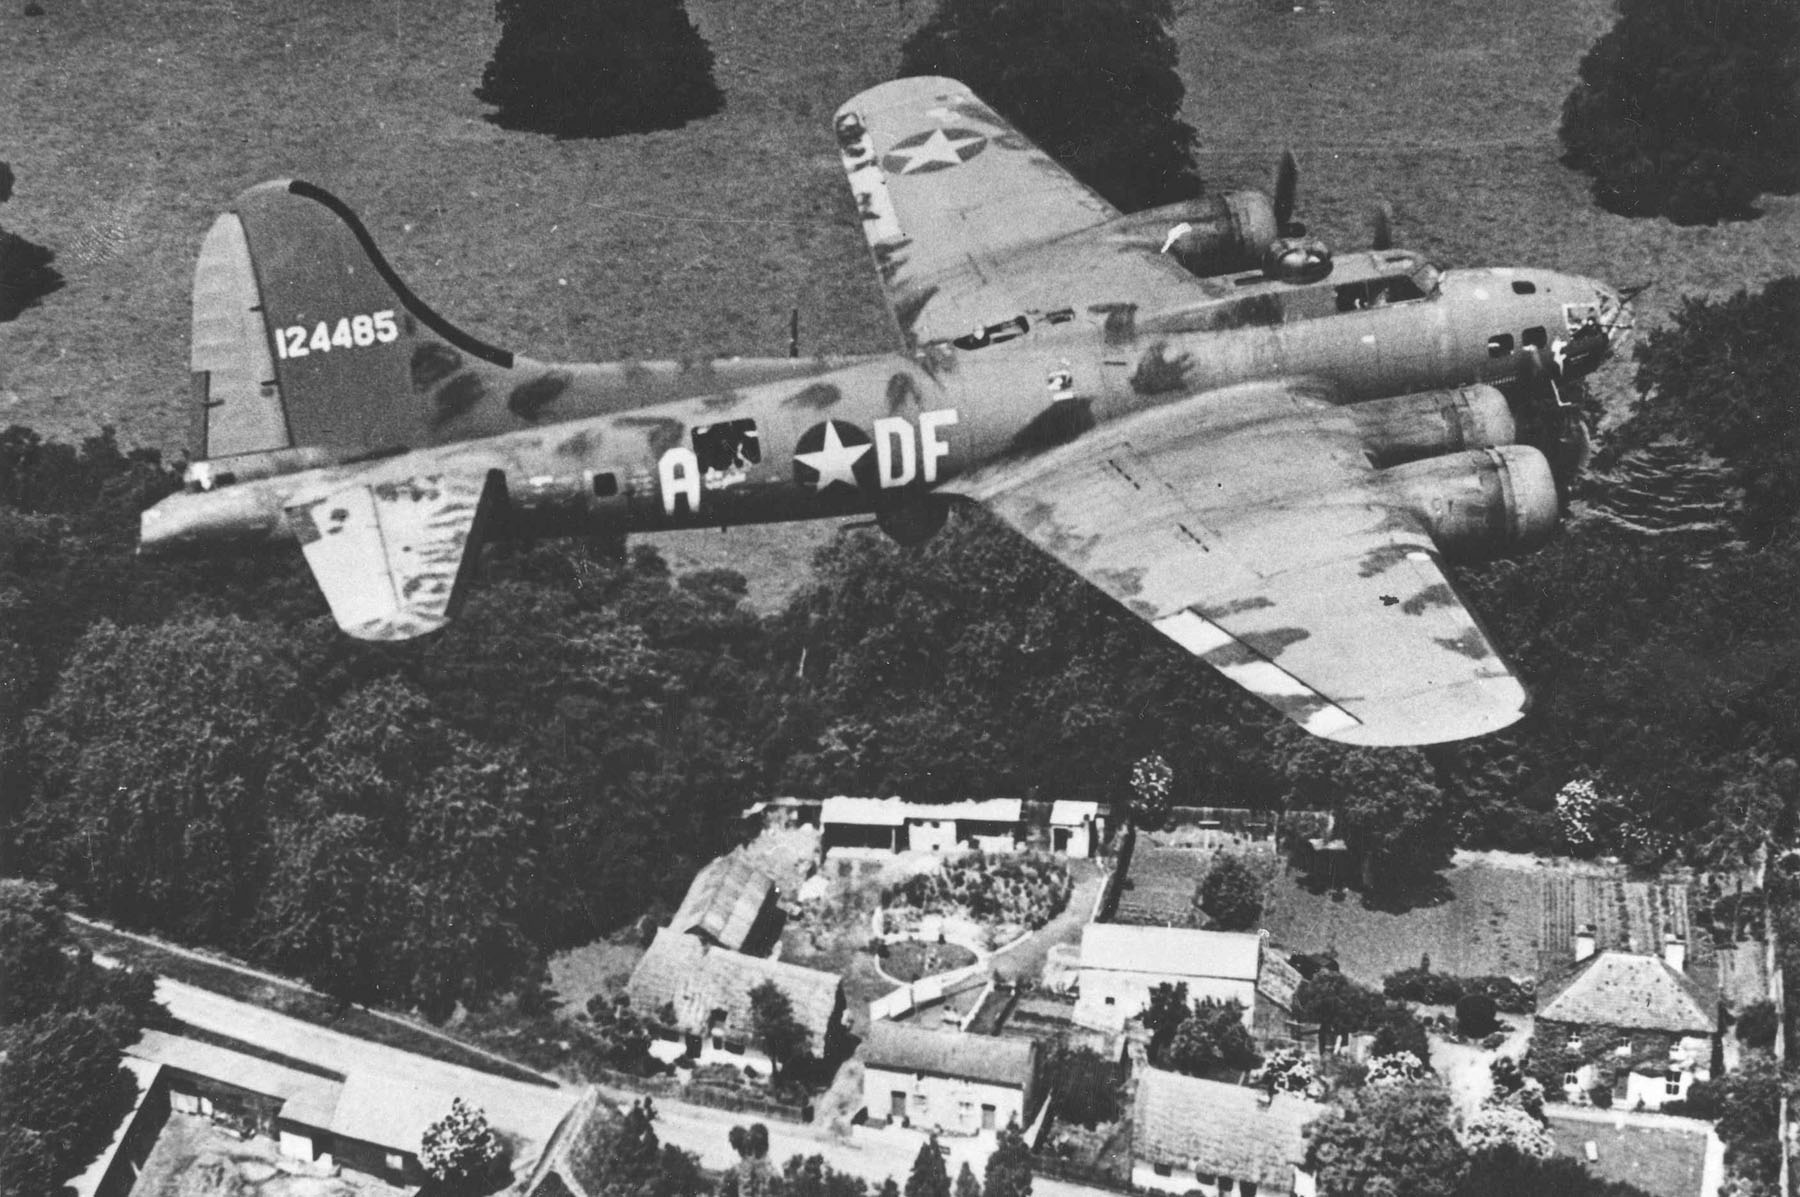 Boeing B-17F-10-BO Flying Fortress 41-22485, Memphis Belle, in flight over England, 1943. (U.S. Air Force)